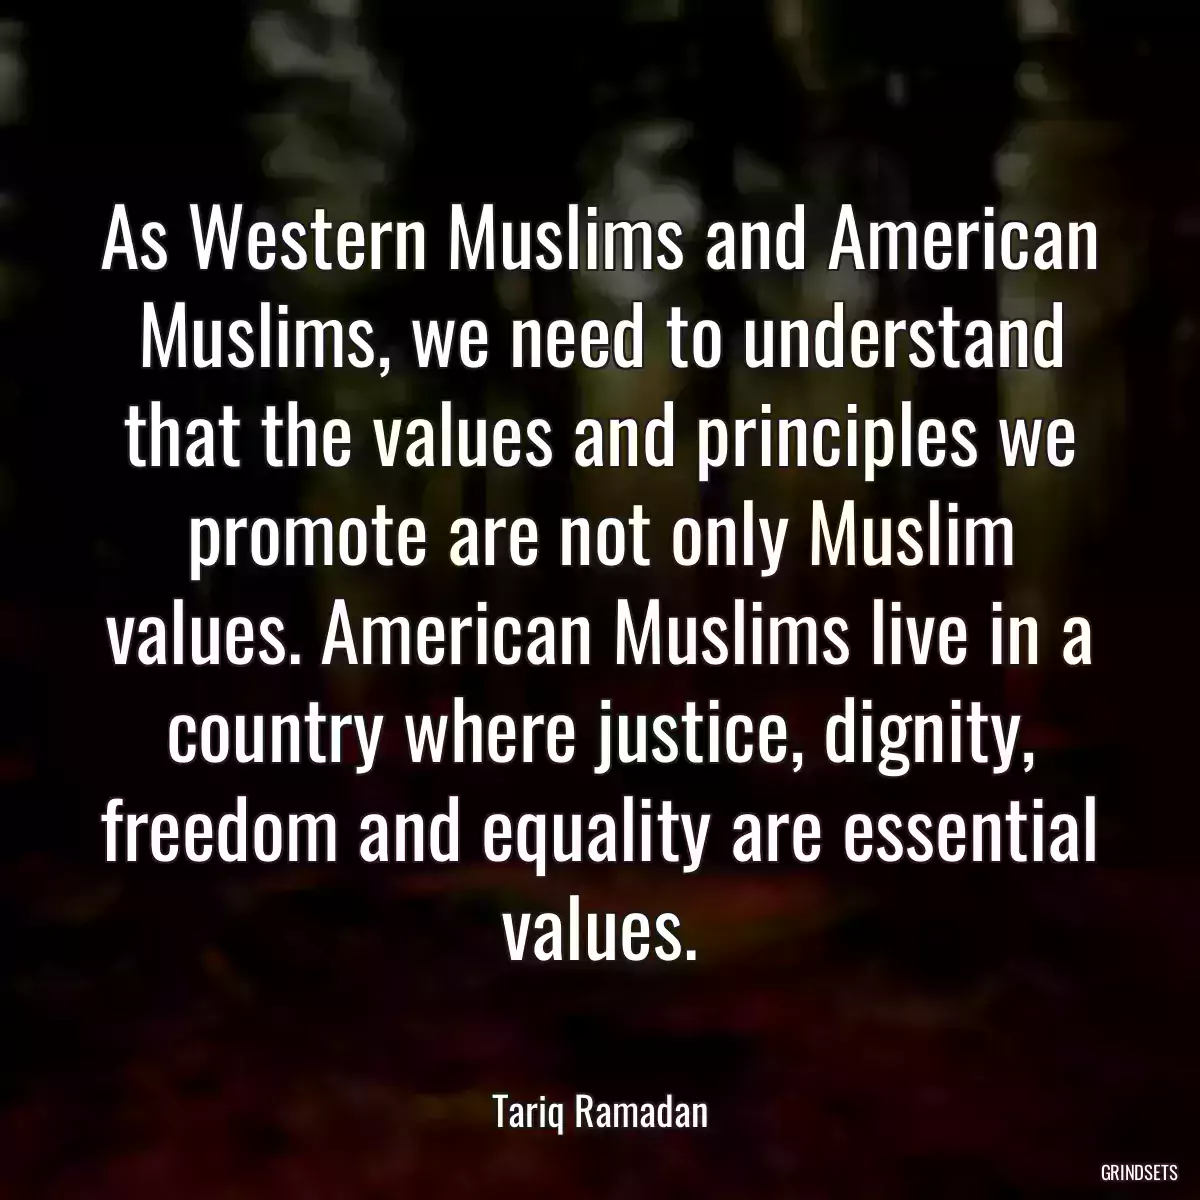 As Western Muslims and American Muslims, we need to understand that the values and principles we promote are not only Muslim values. American Muslims live in a country where justice, dignity, freedom and equality are essential values.